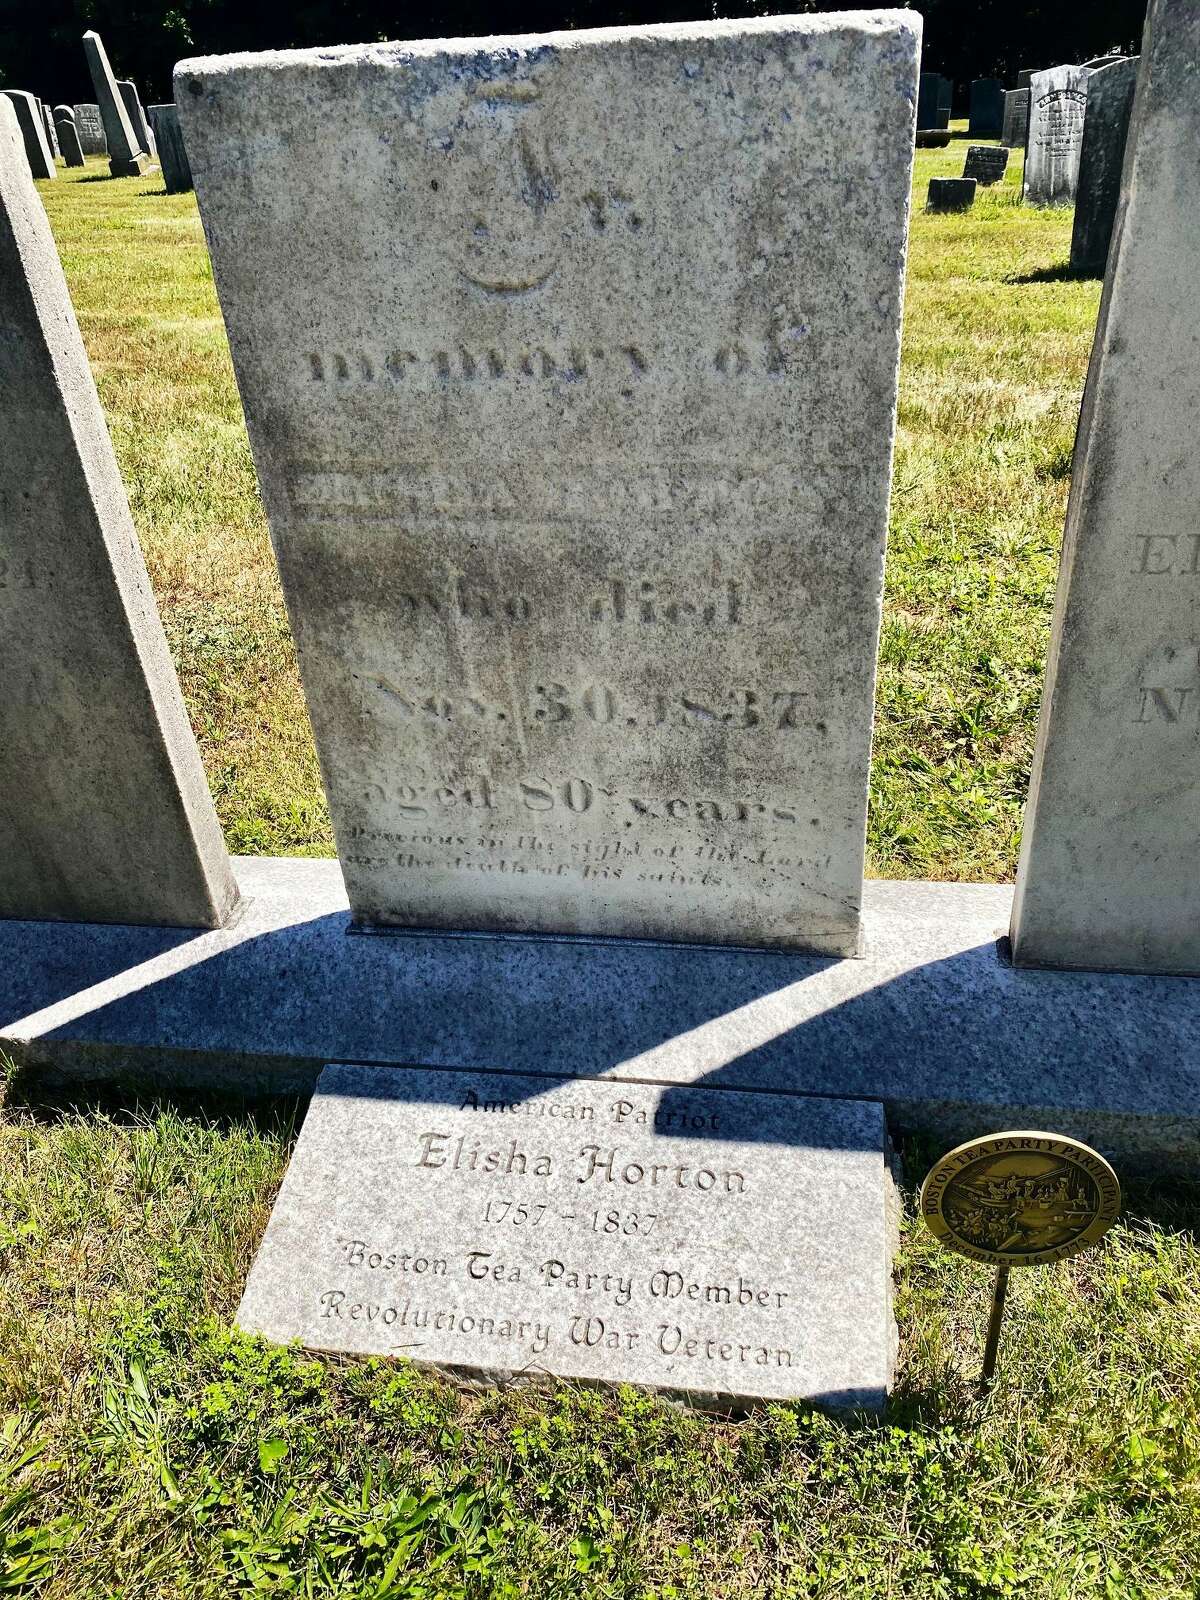 The Boston Tea Party Ships & Museum held a special program July 9 at the Bantam Cemetery, honoring Elisha Horton at his grave for his participation in the Boston Tea Party, with a first-time commemorative grave marker.